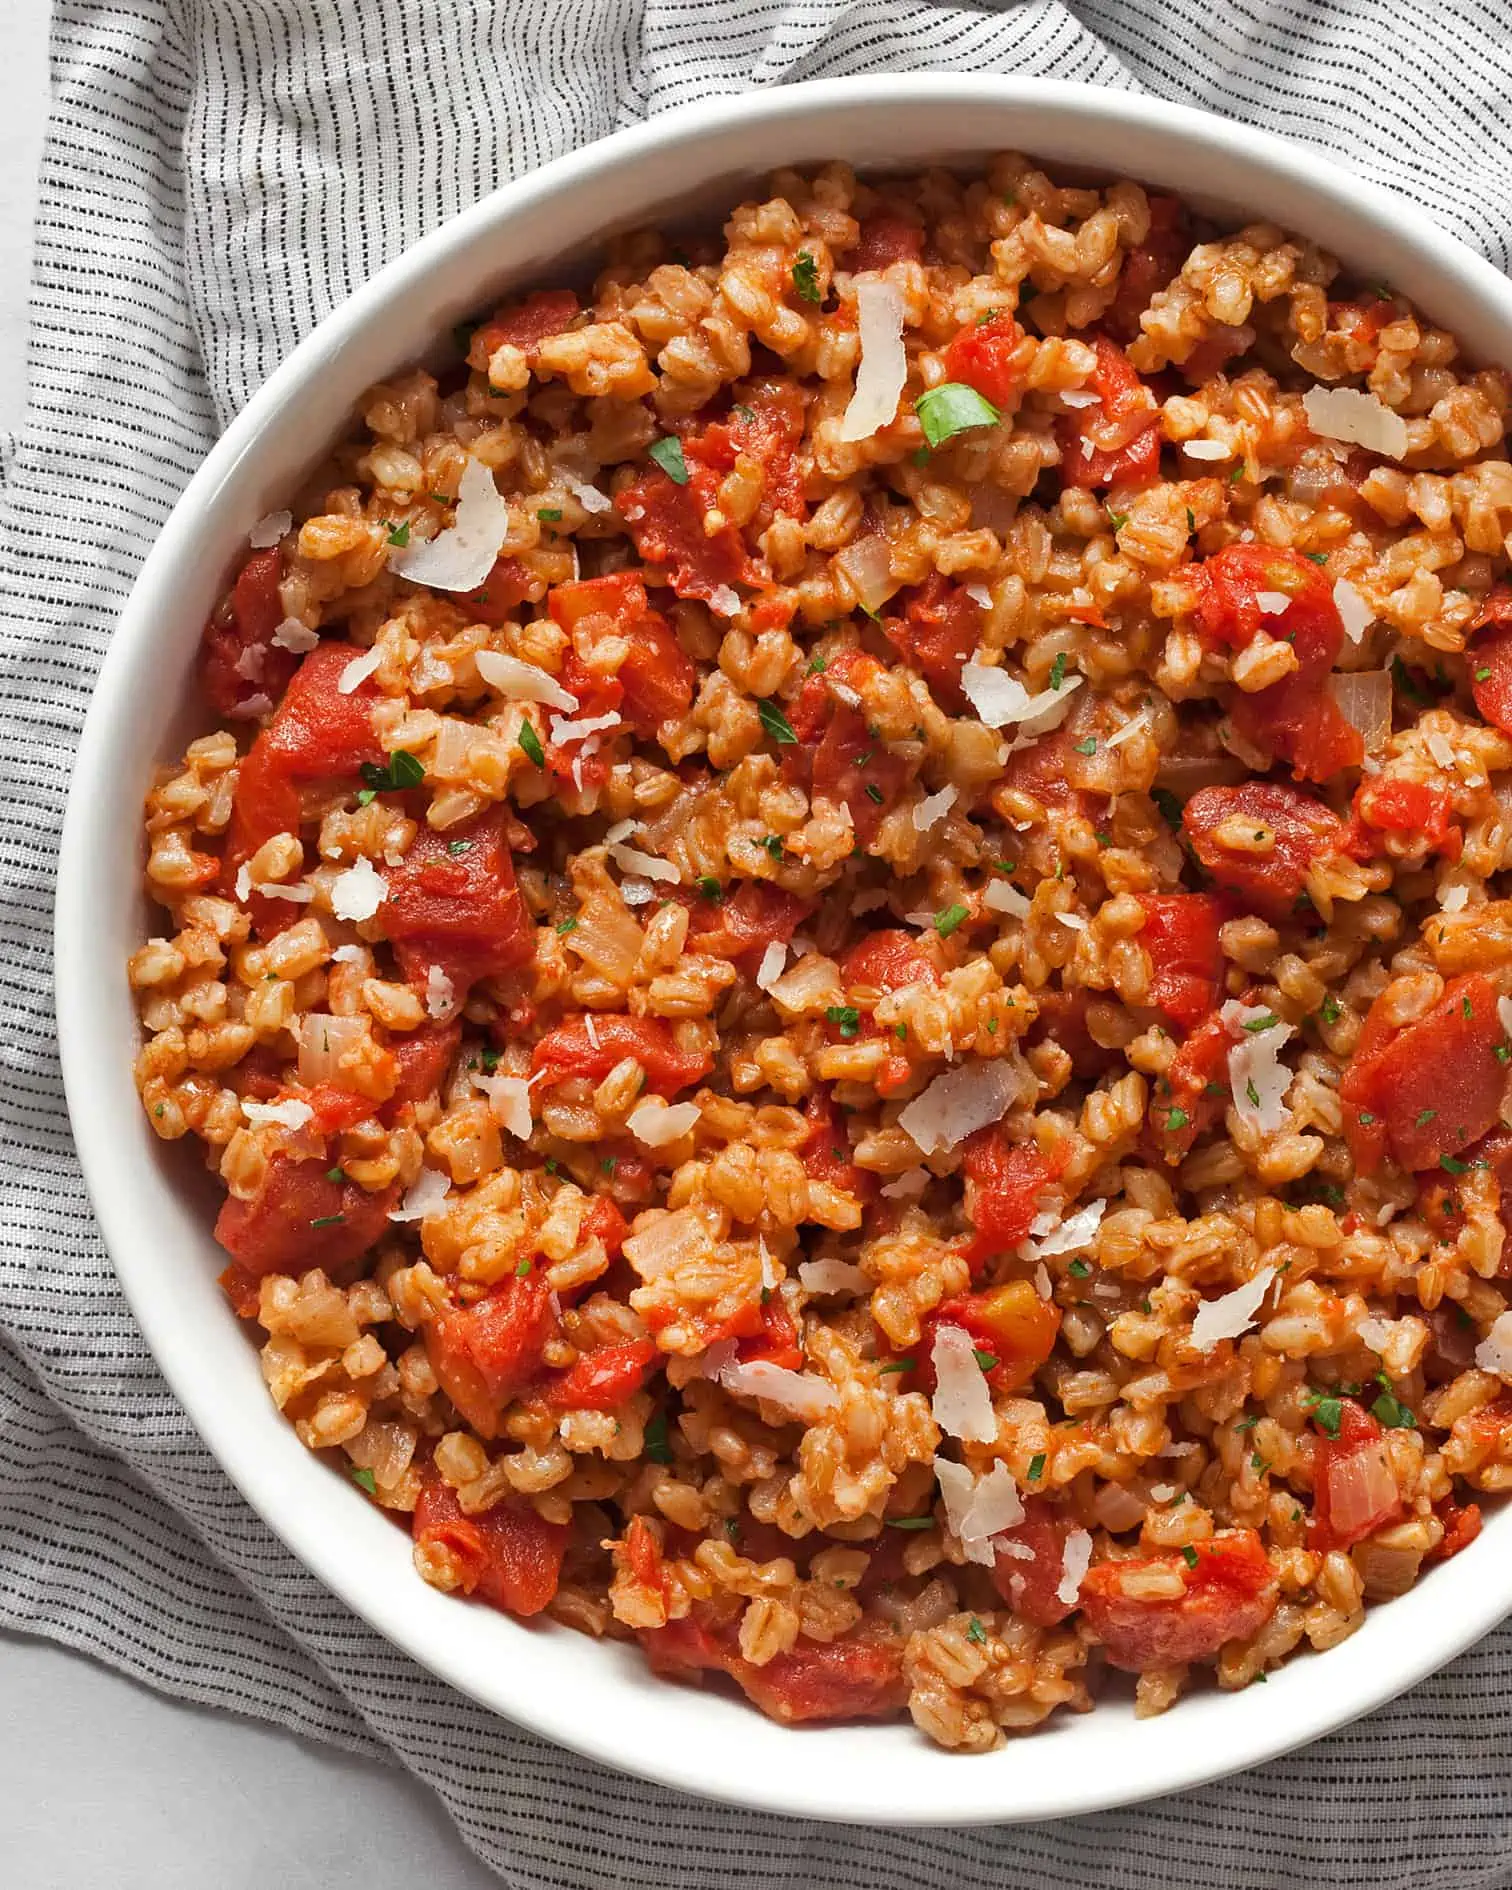 Baked farro risotto with tomatoes in a bowl.